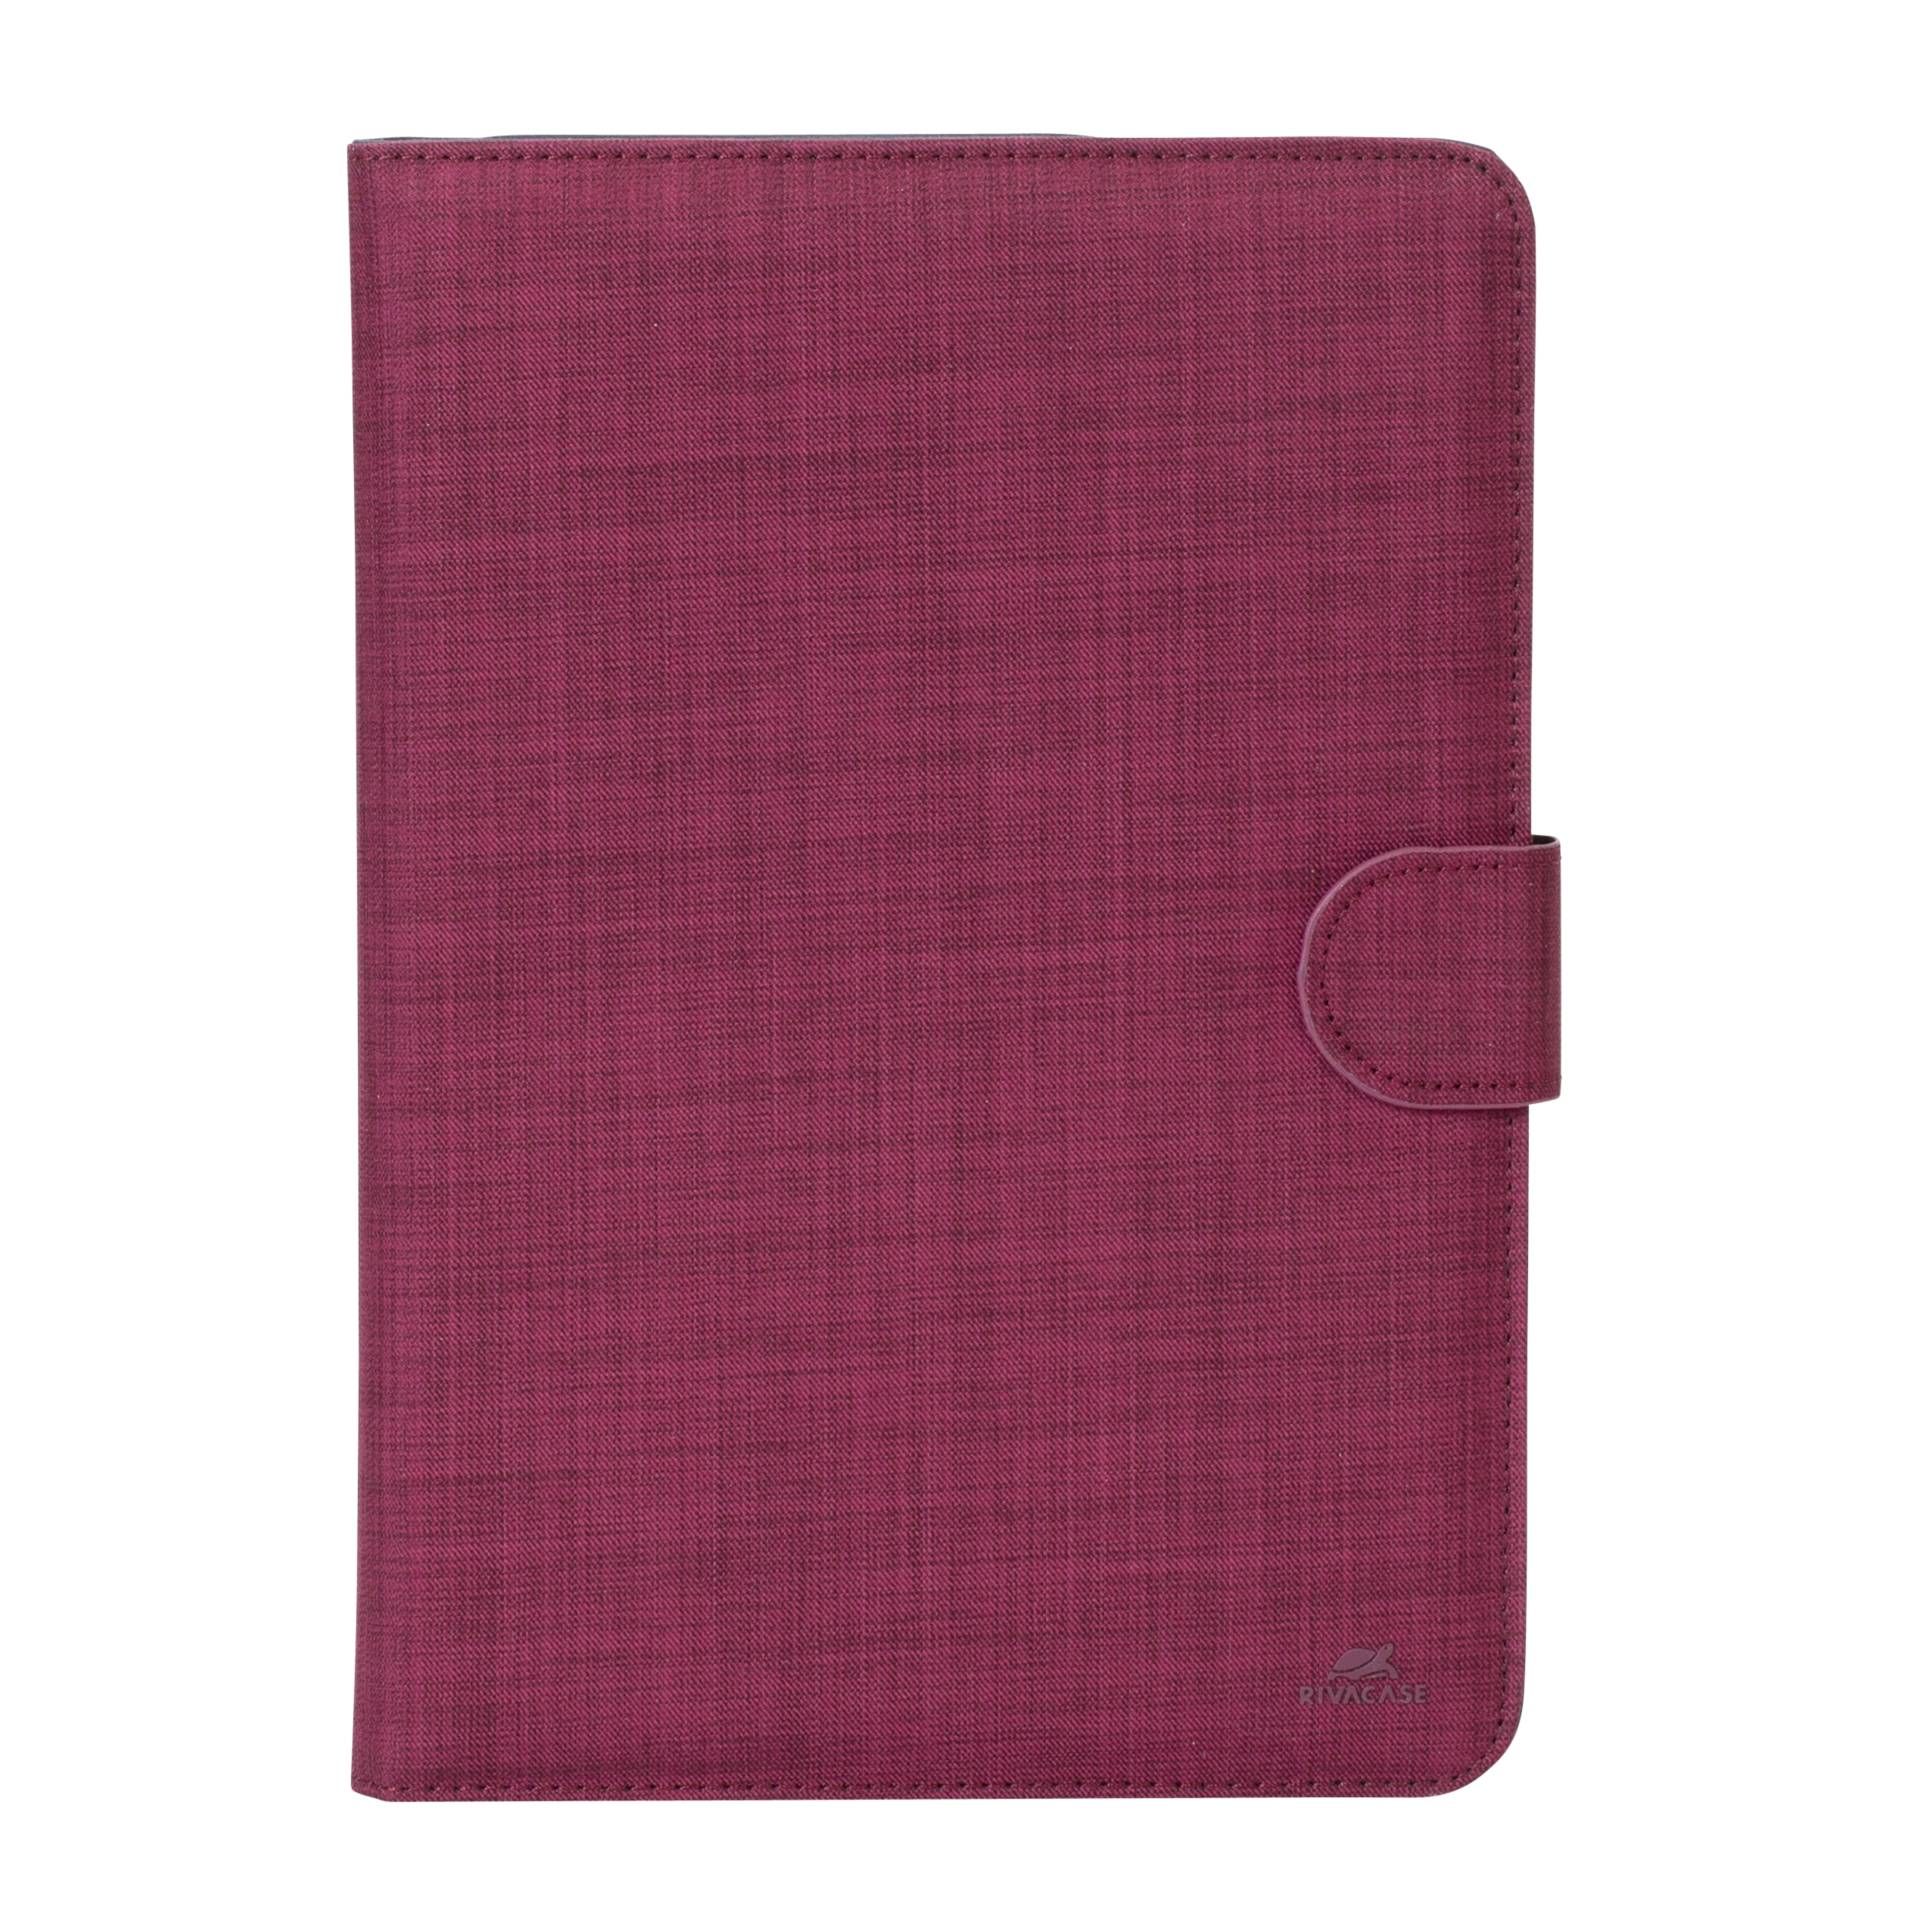 RIVACASE 3317 rosso tablet case 10.1